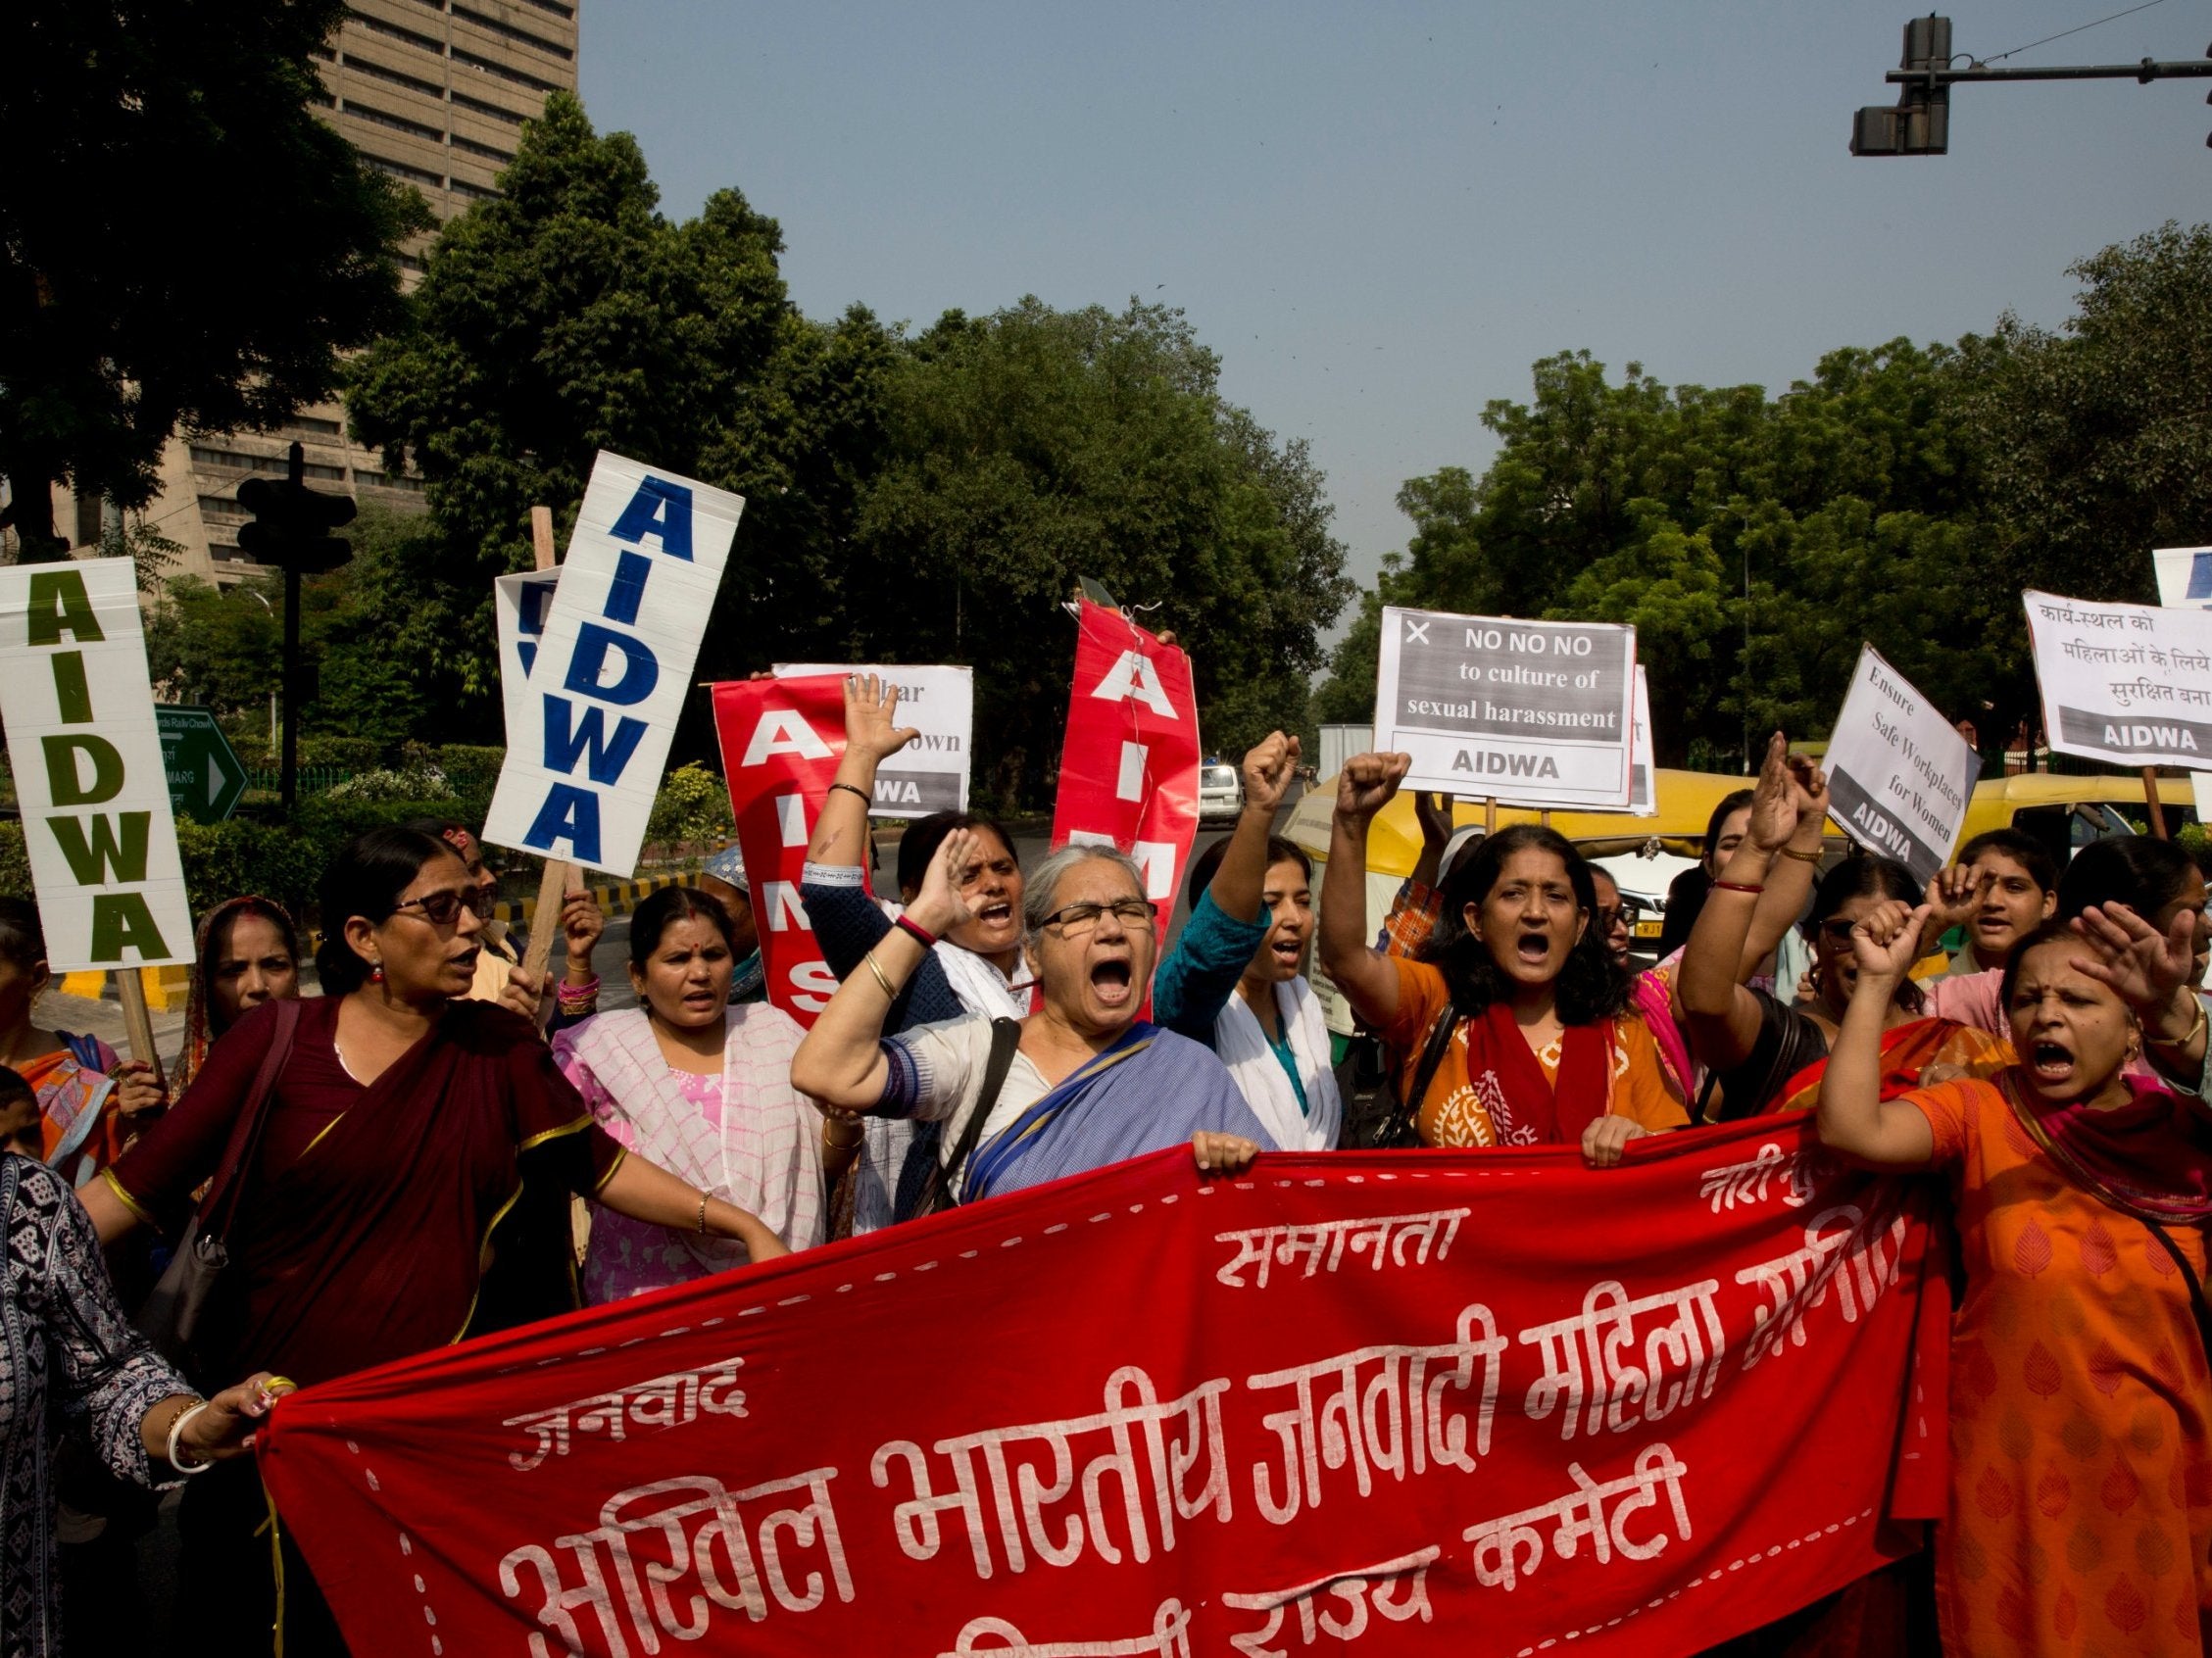 Indian women shout slogans during a protest against sexual harassment in the workplace in New Delhi.